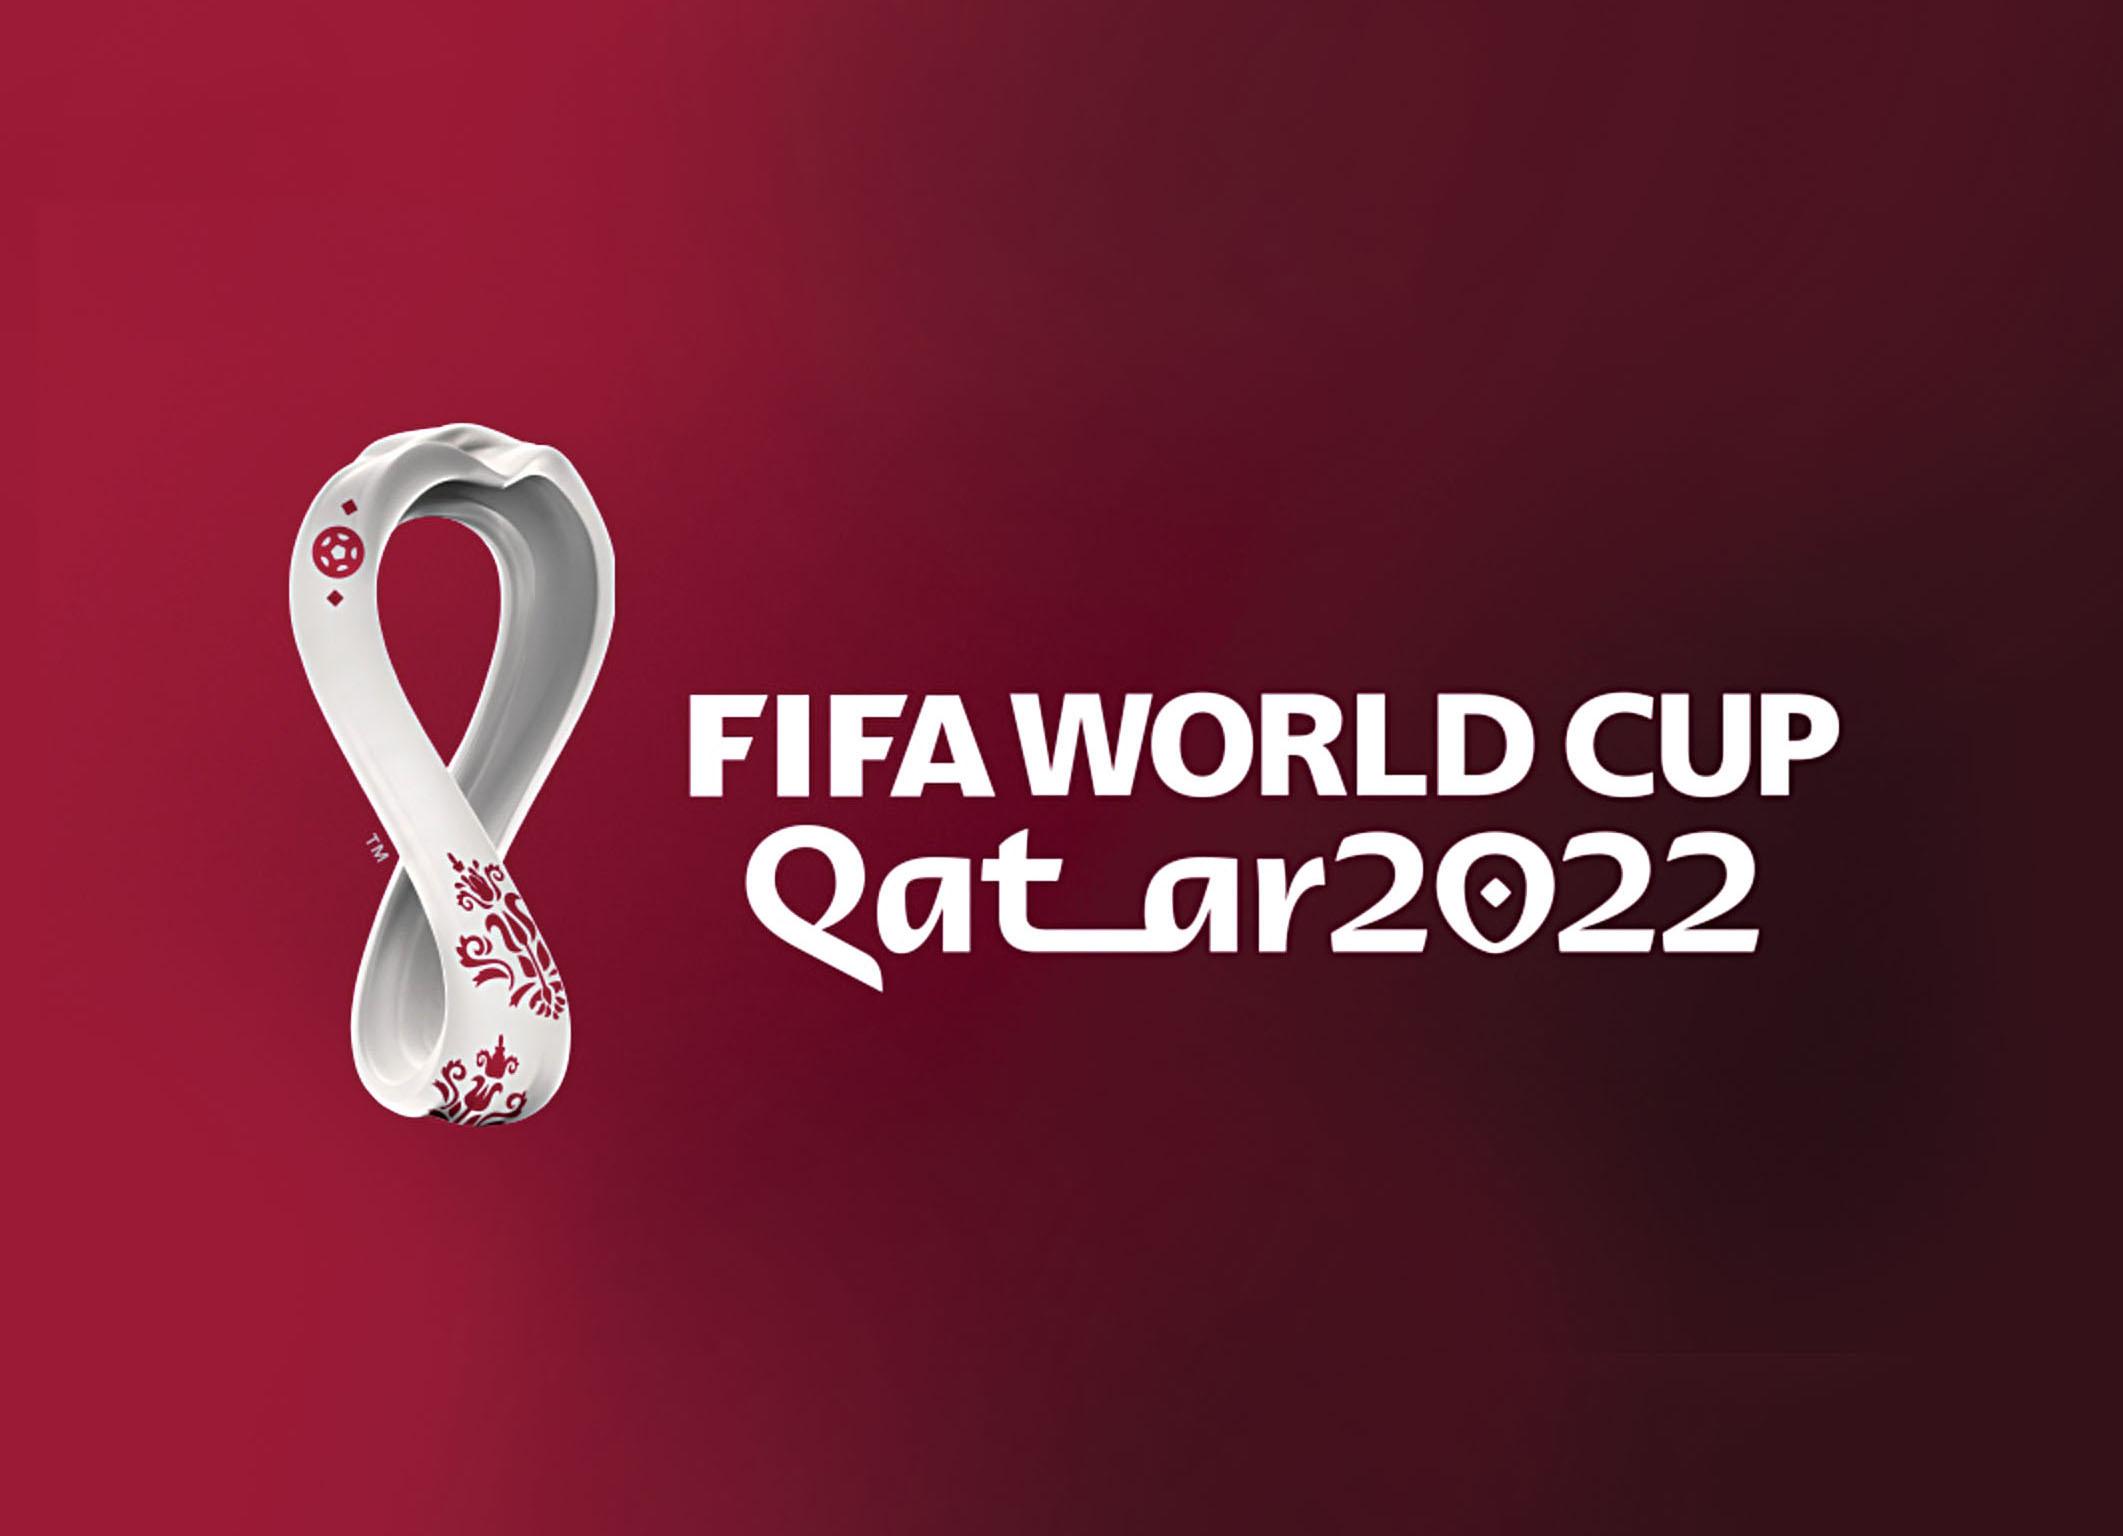 Top 25 Best Fifa World Cup Qatar 2022 Wallpapers [ HQ ]